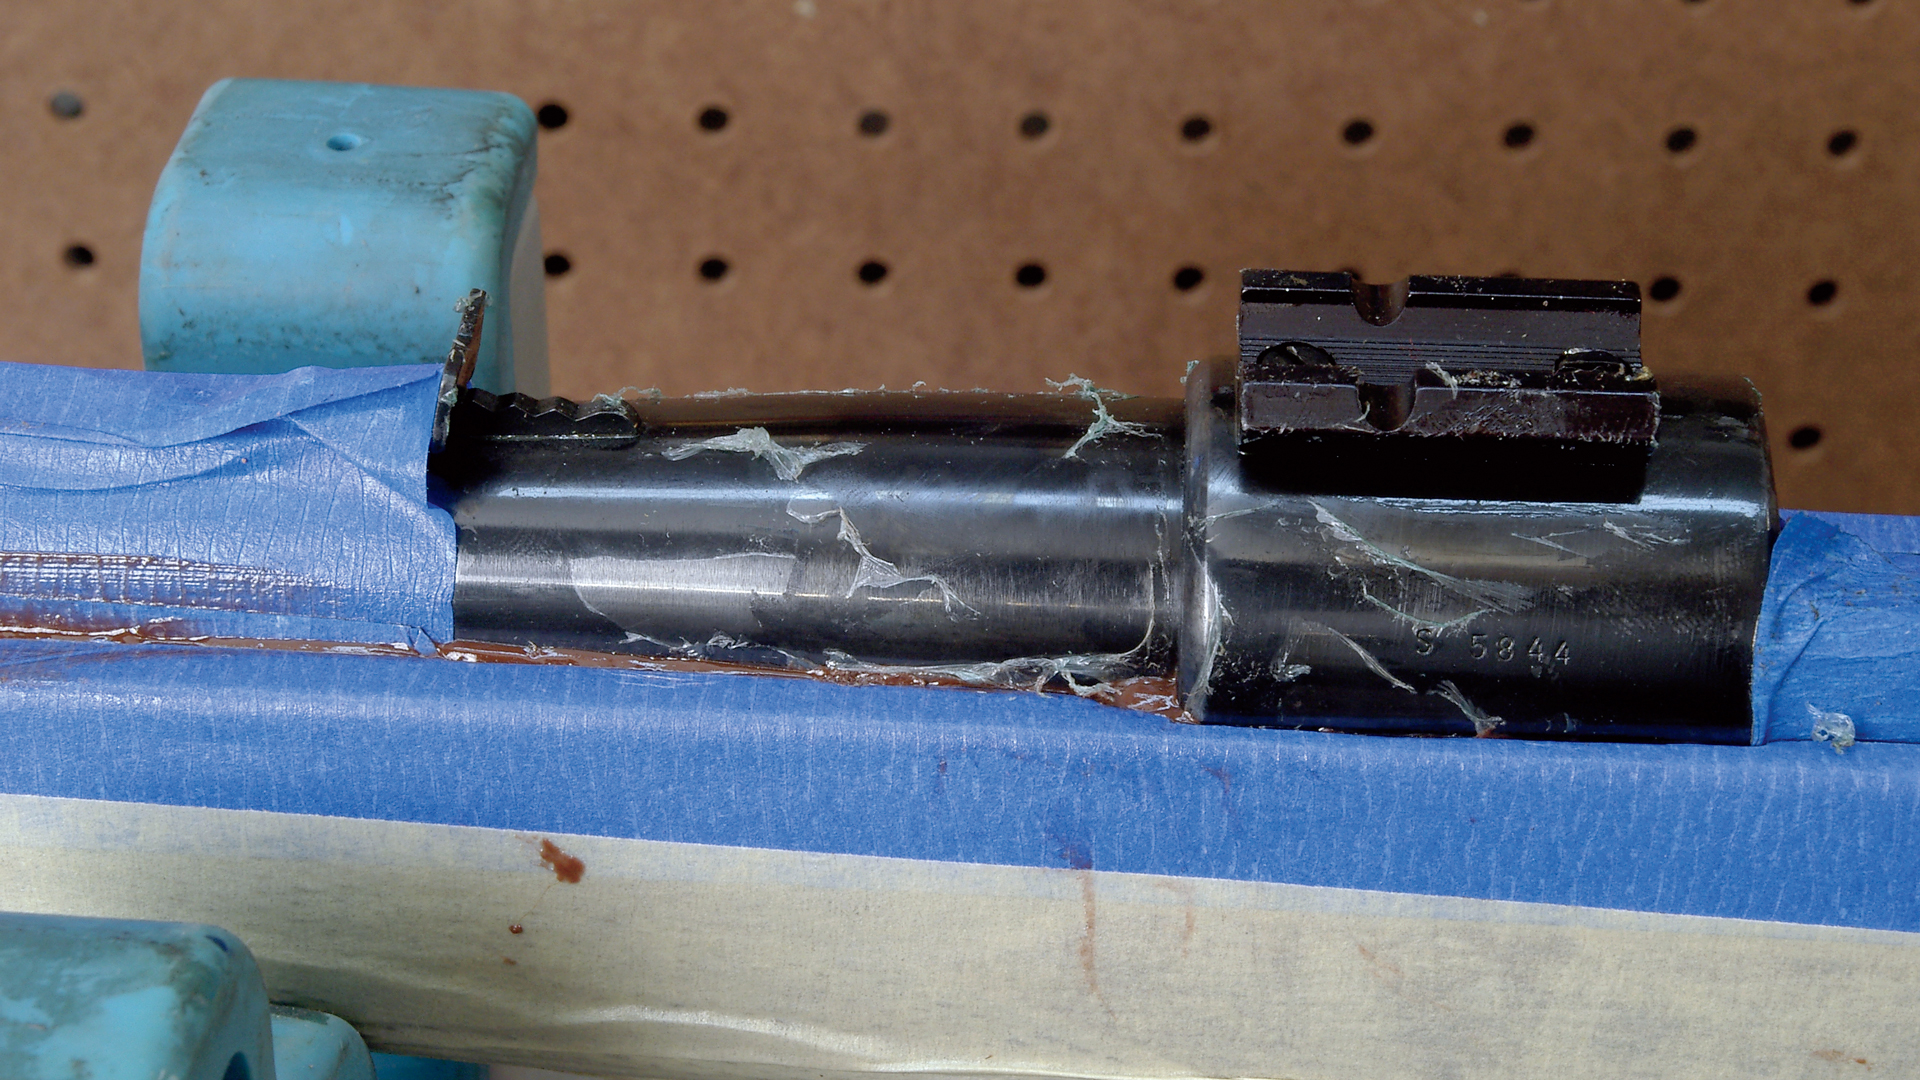 How to glass bed a rifle, Part I ~ Epoxy bedding and free floating